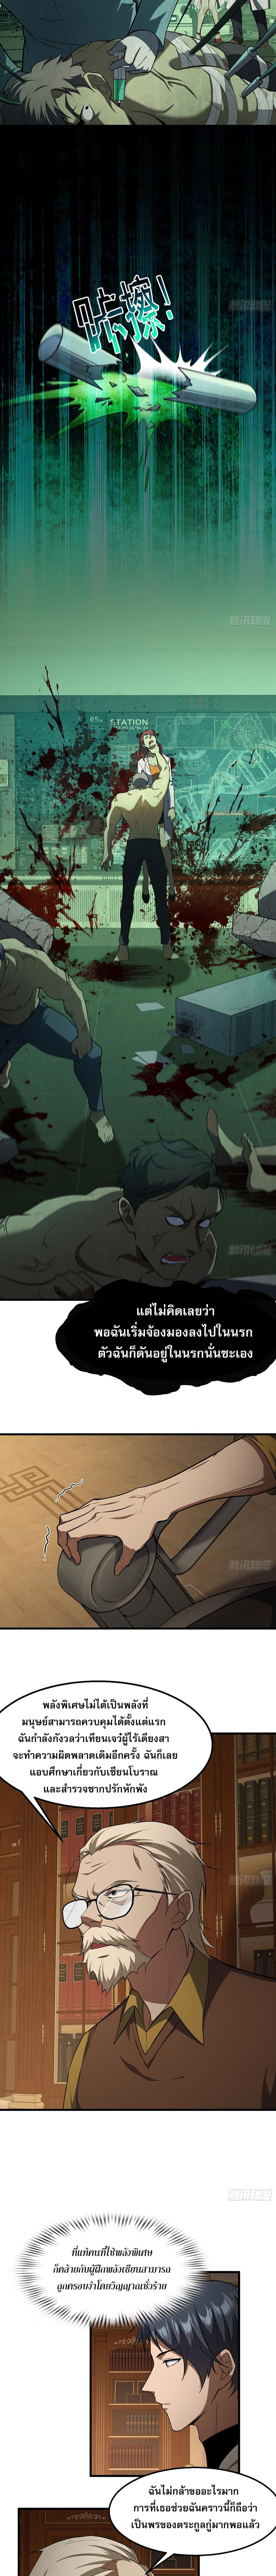 The All-Knowing Cultivator ผู้ฝึกตนผู้รอบรู้ 4/10